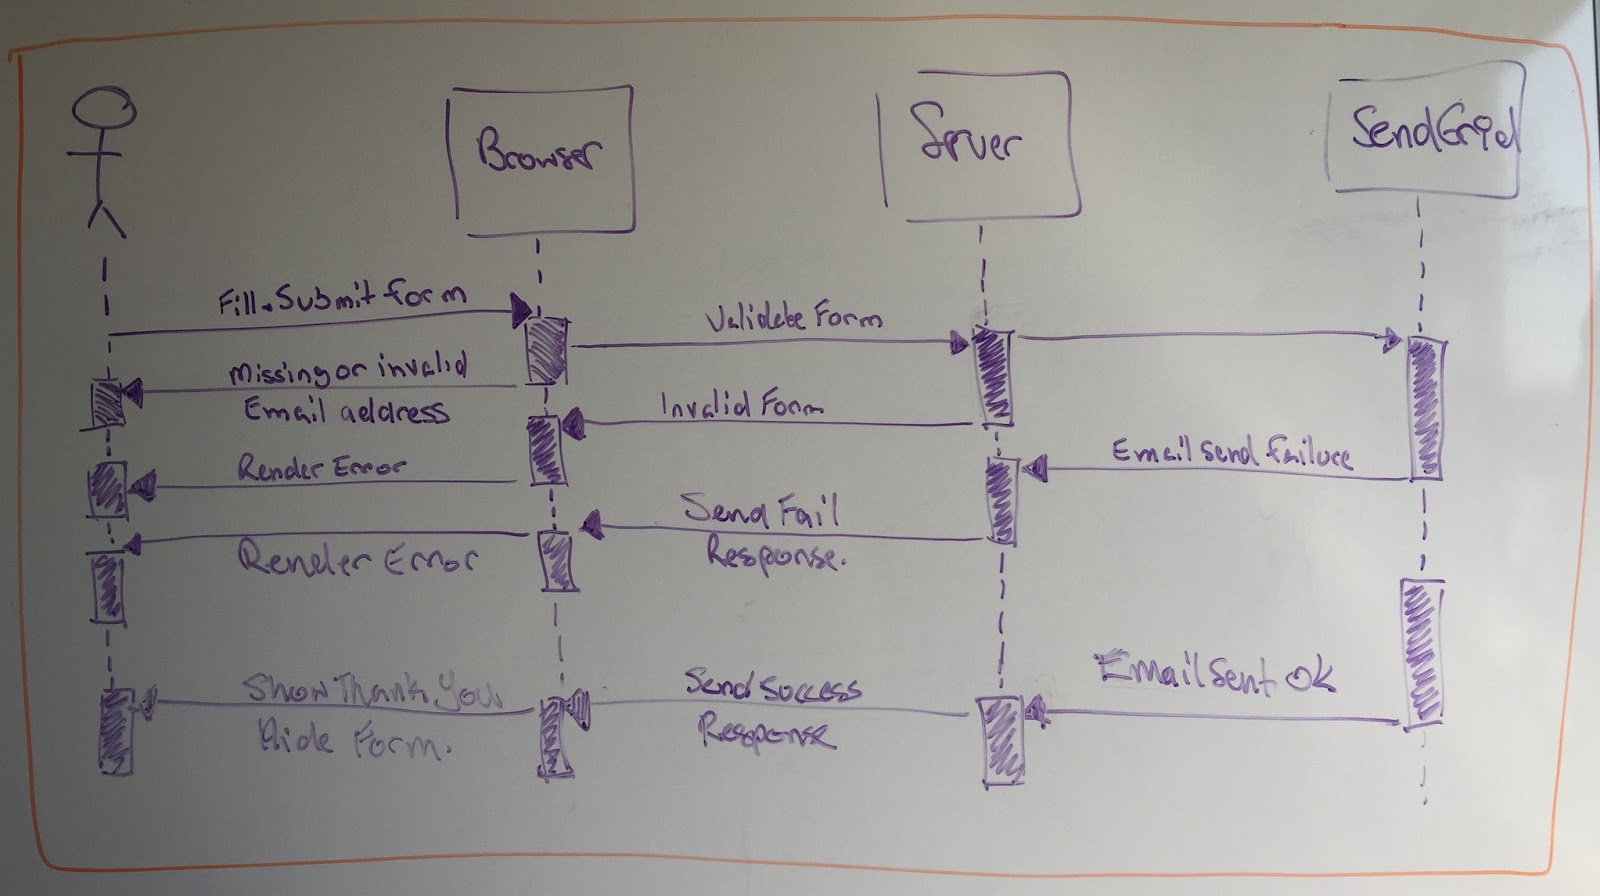 The user flow of the application